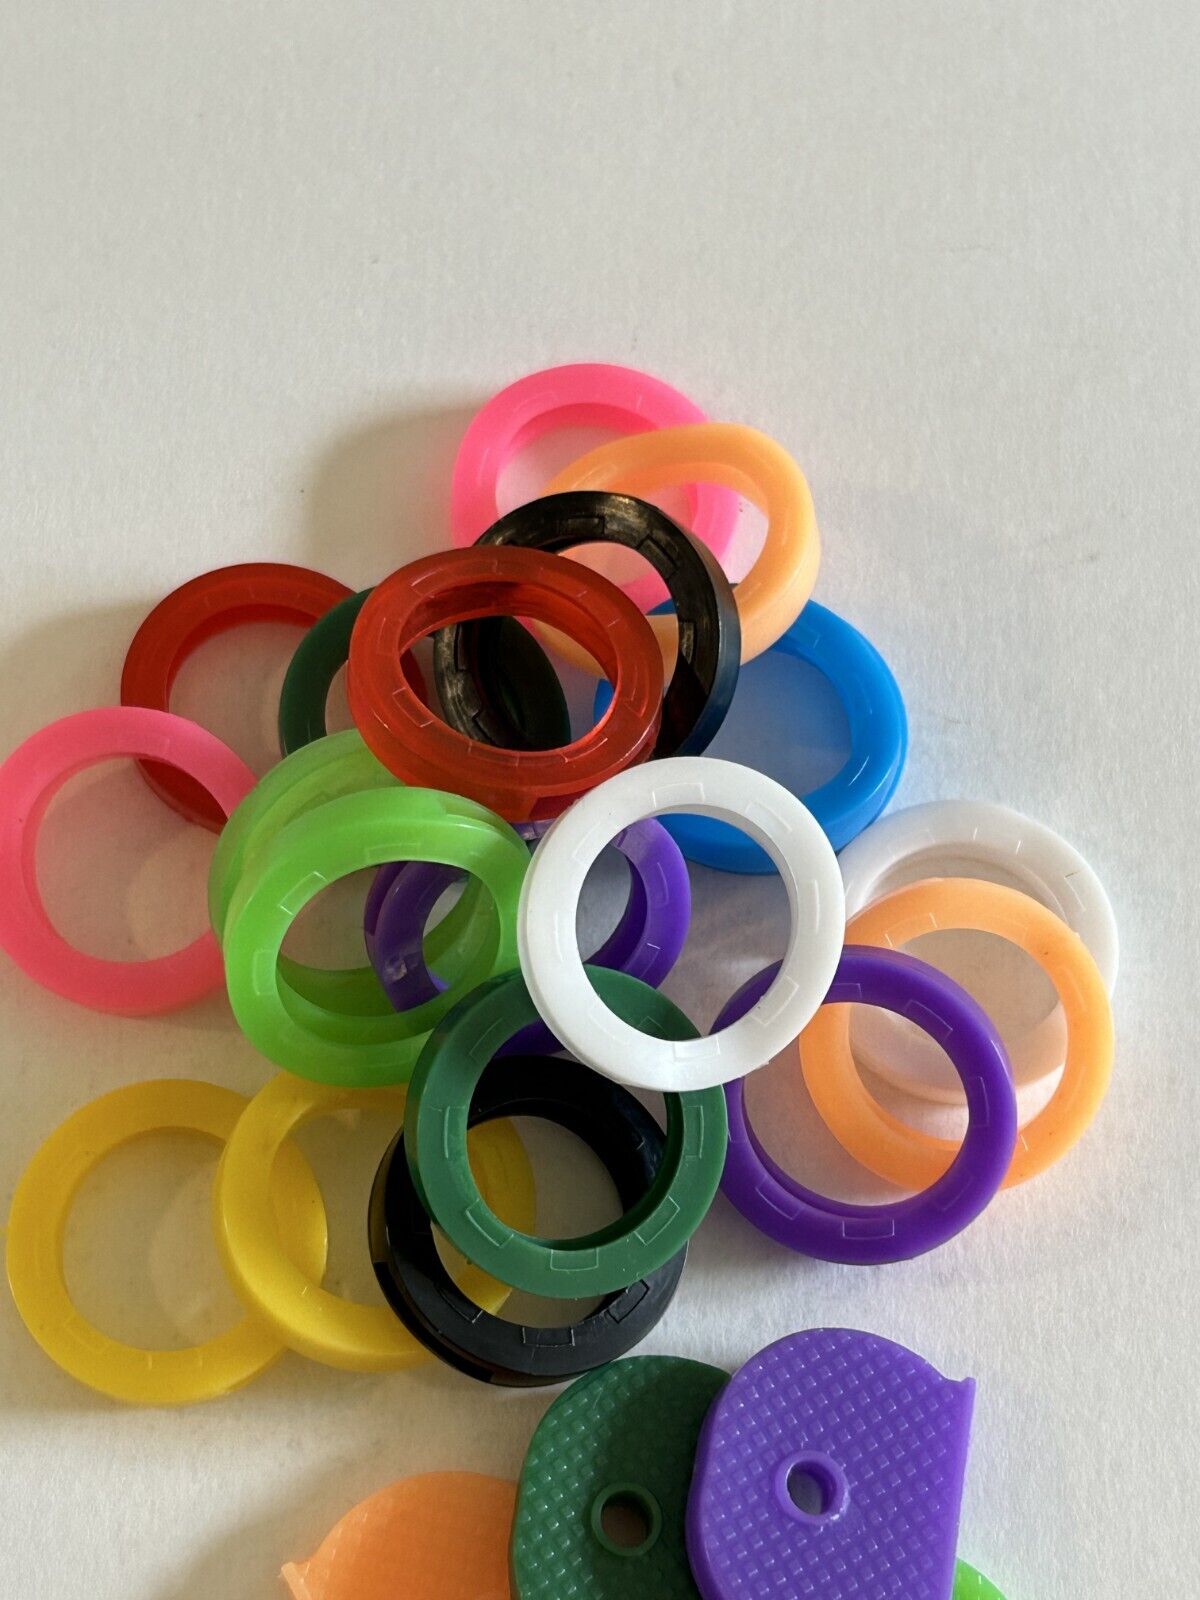 20pcs Key Cap/Ring Silicone Identifier Cover, Color Coded Key ID Tags